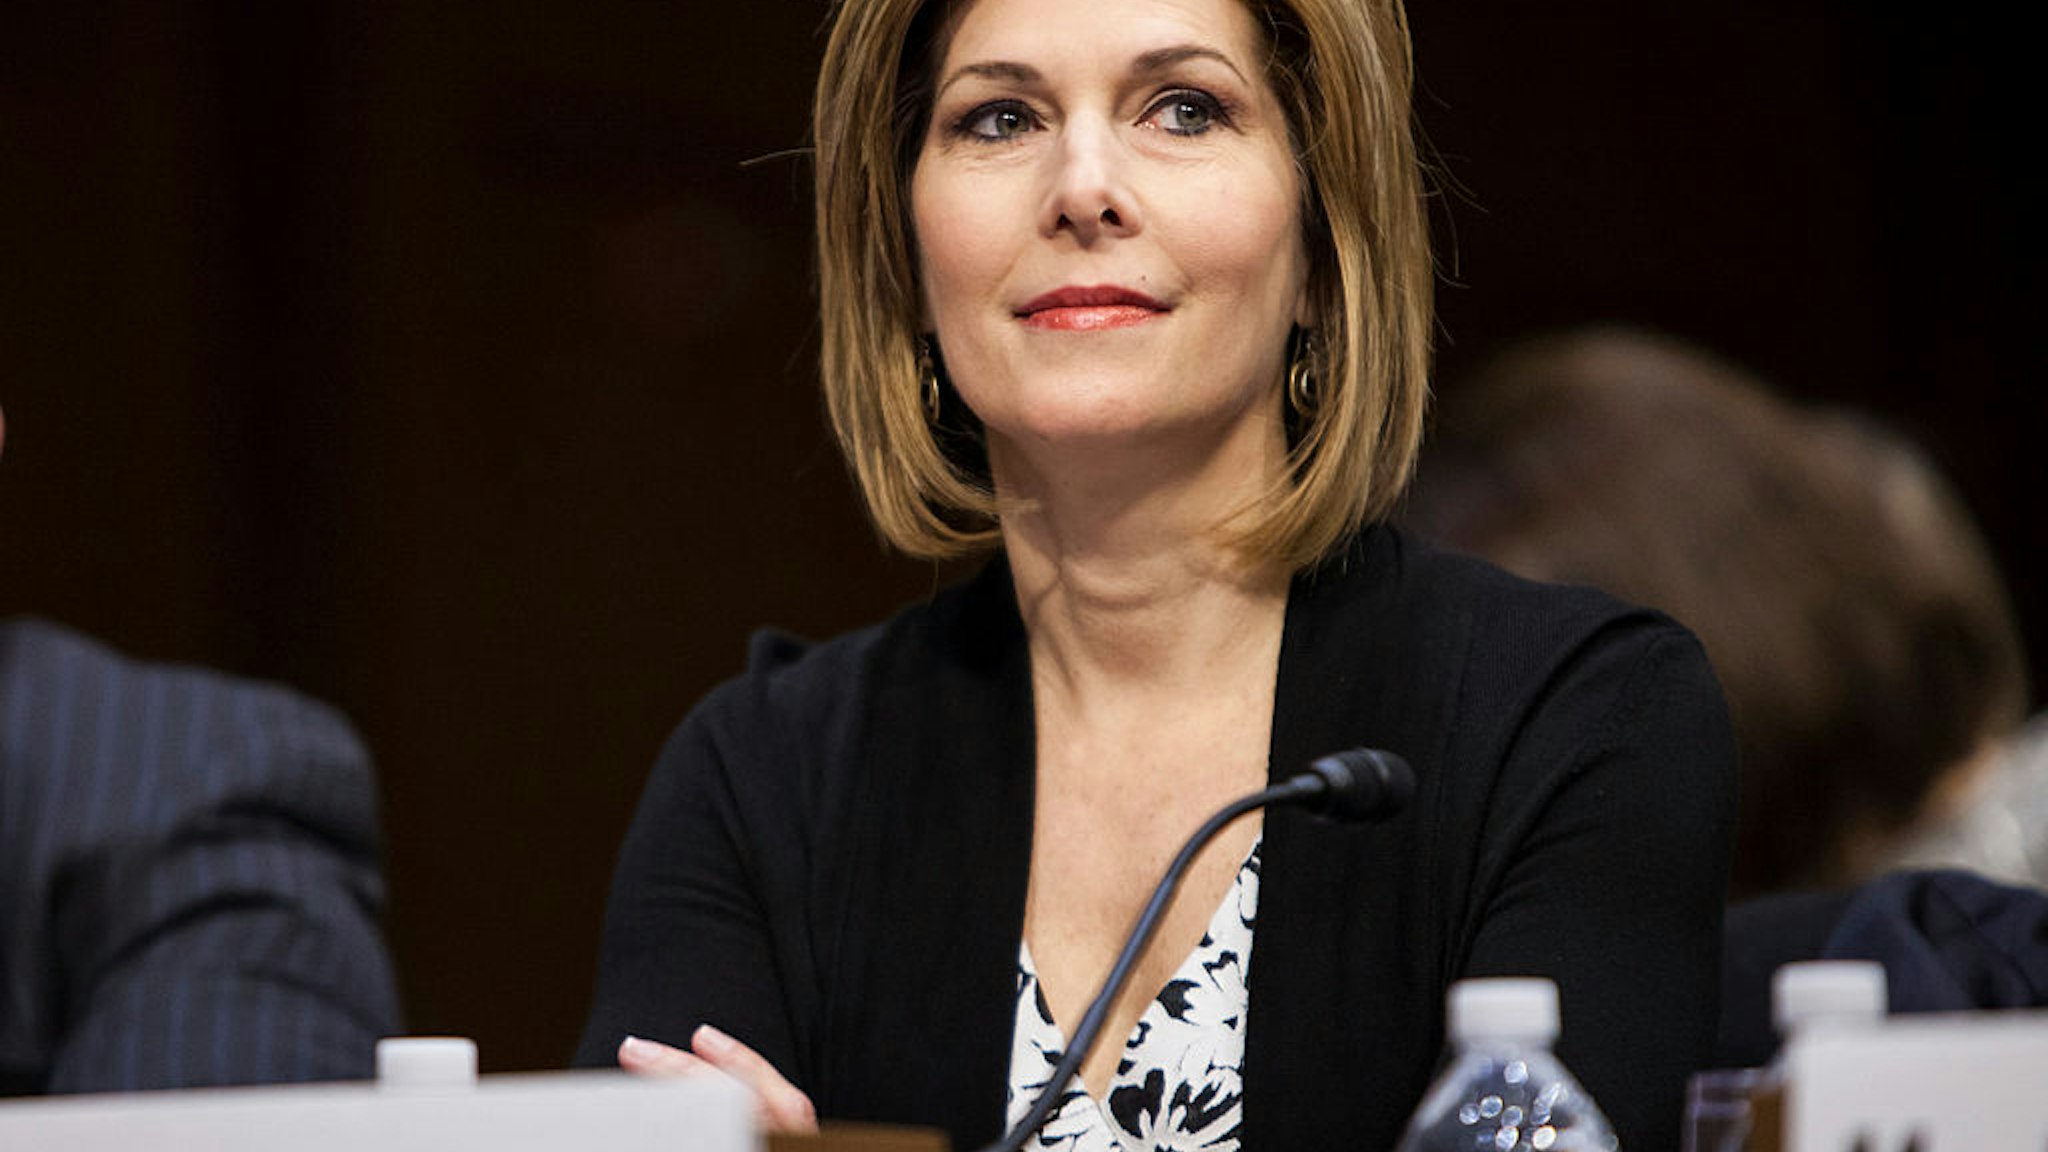 Investigative journalist Sharyl Attkisson testifies at the confirmation hearing for Loretta Lynch to replace U.S. Attorney General Eric Holder by the Senate Judiciary Committee at the U.S. Capitol in Washington, D.C. on January 29, 2015.